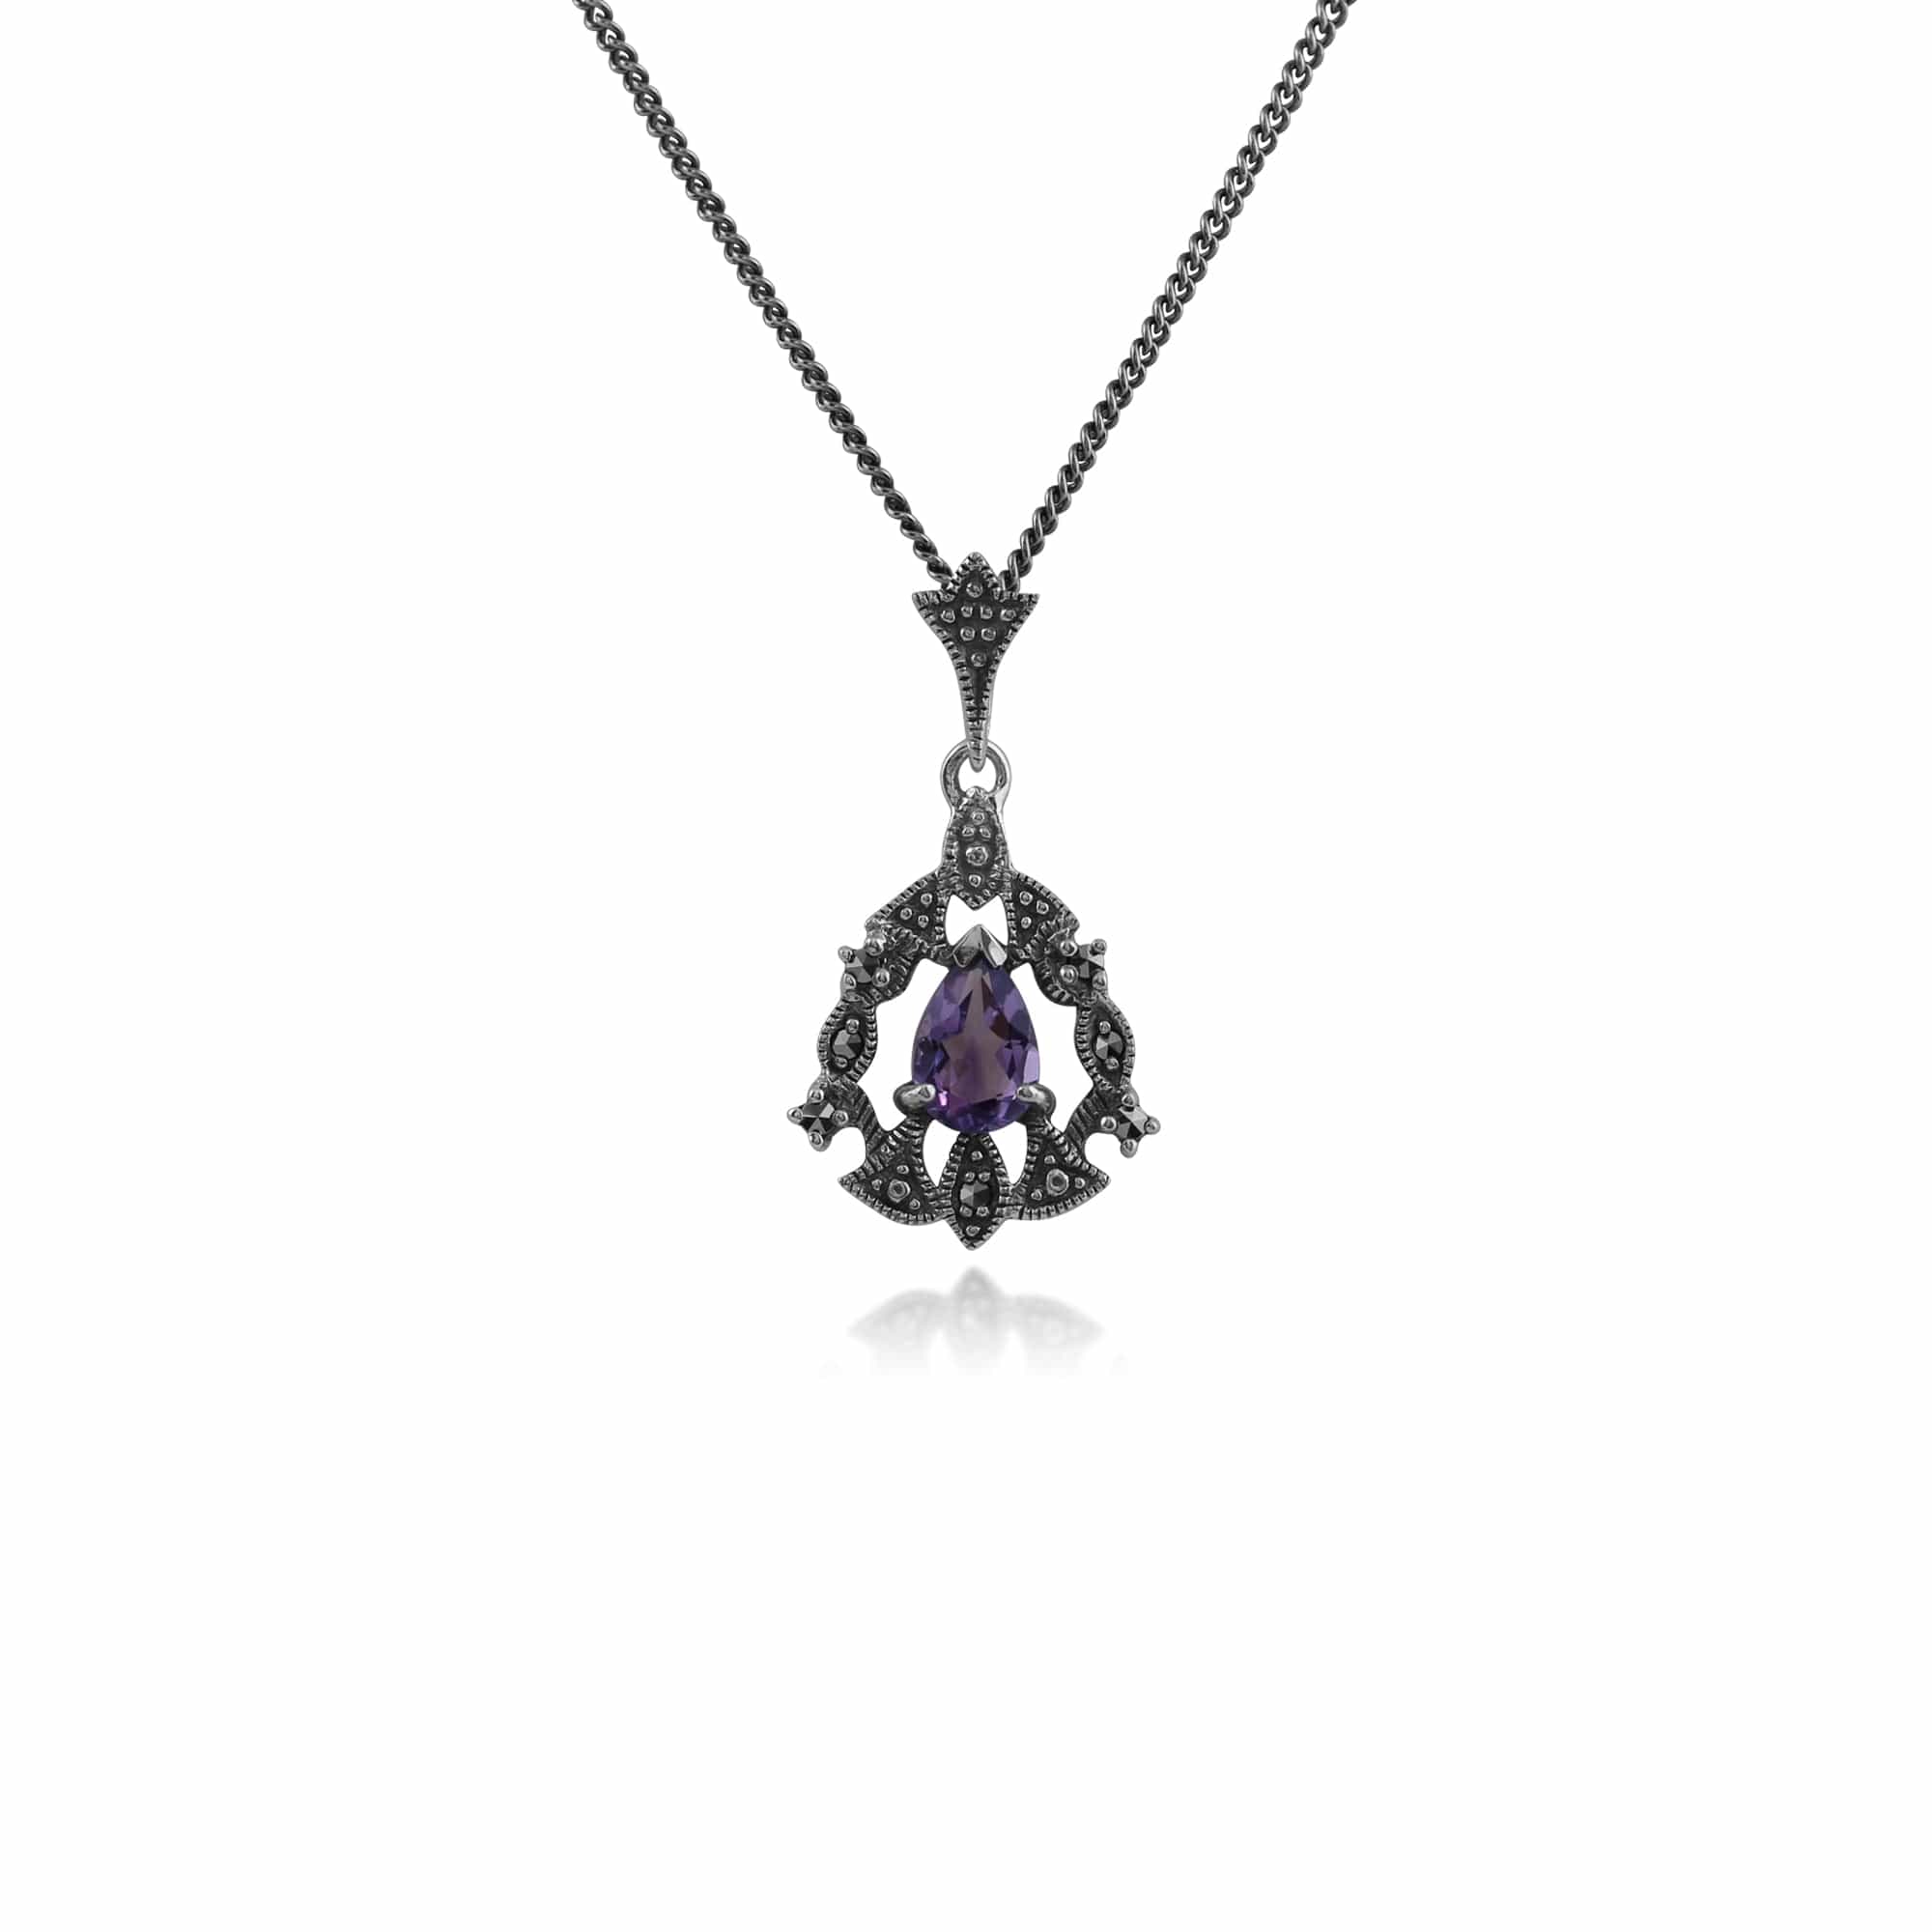 214N540202925 Art Nouveau Style Pear Amethyst & Marcasite Garland Necklace in 925 Sterling Silver 1